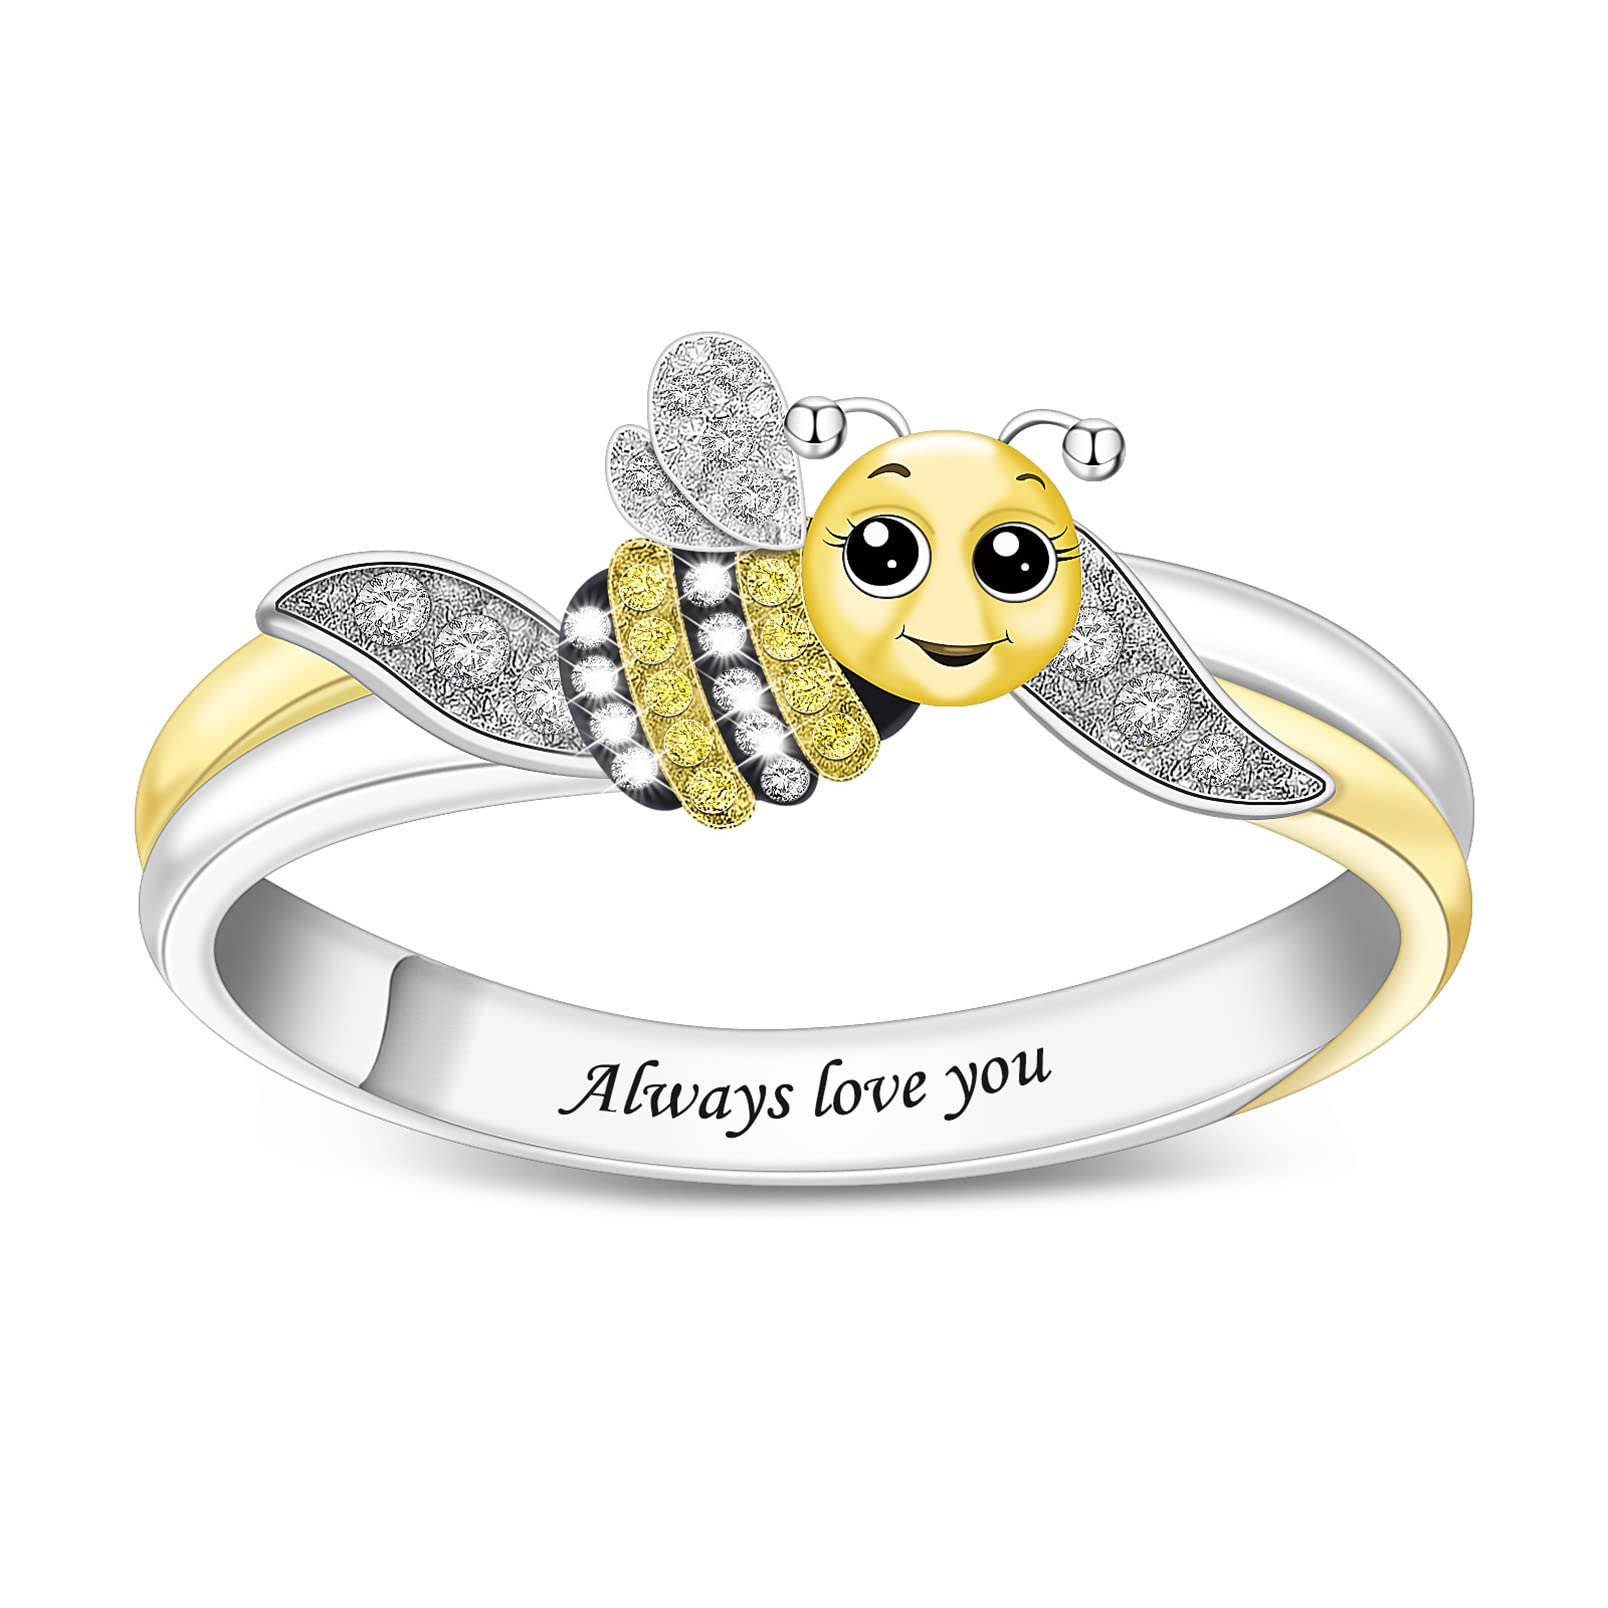 Personalized Little Bee Shaped Ring and Free Engraving.